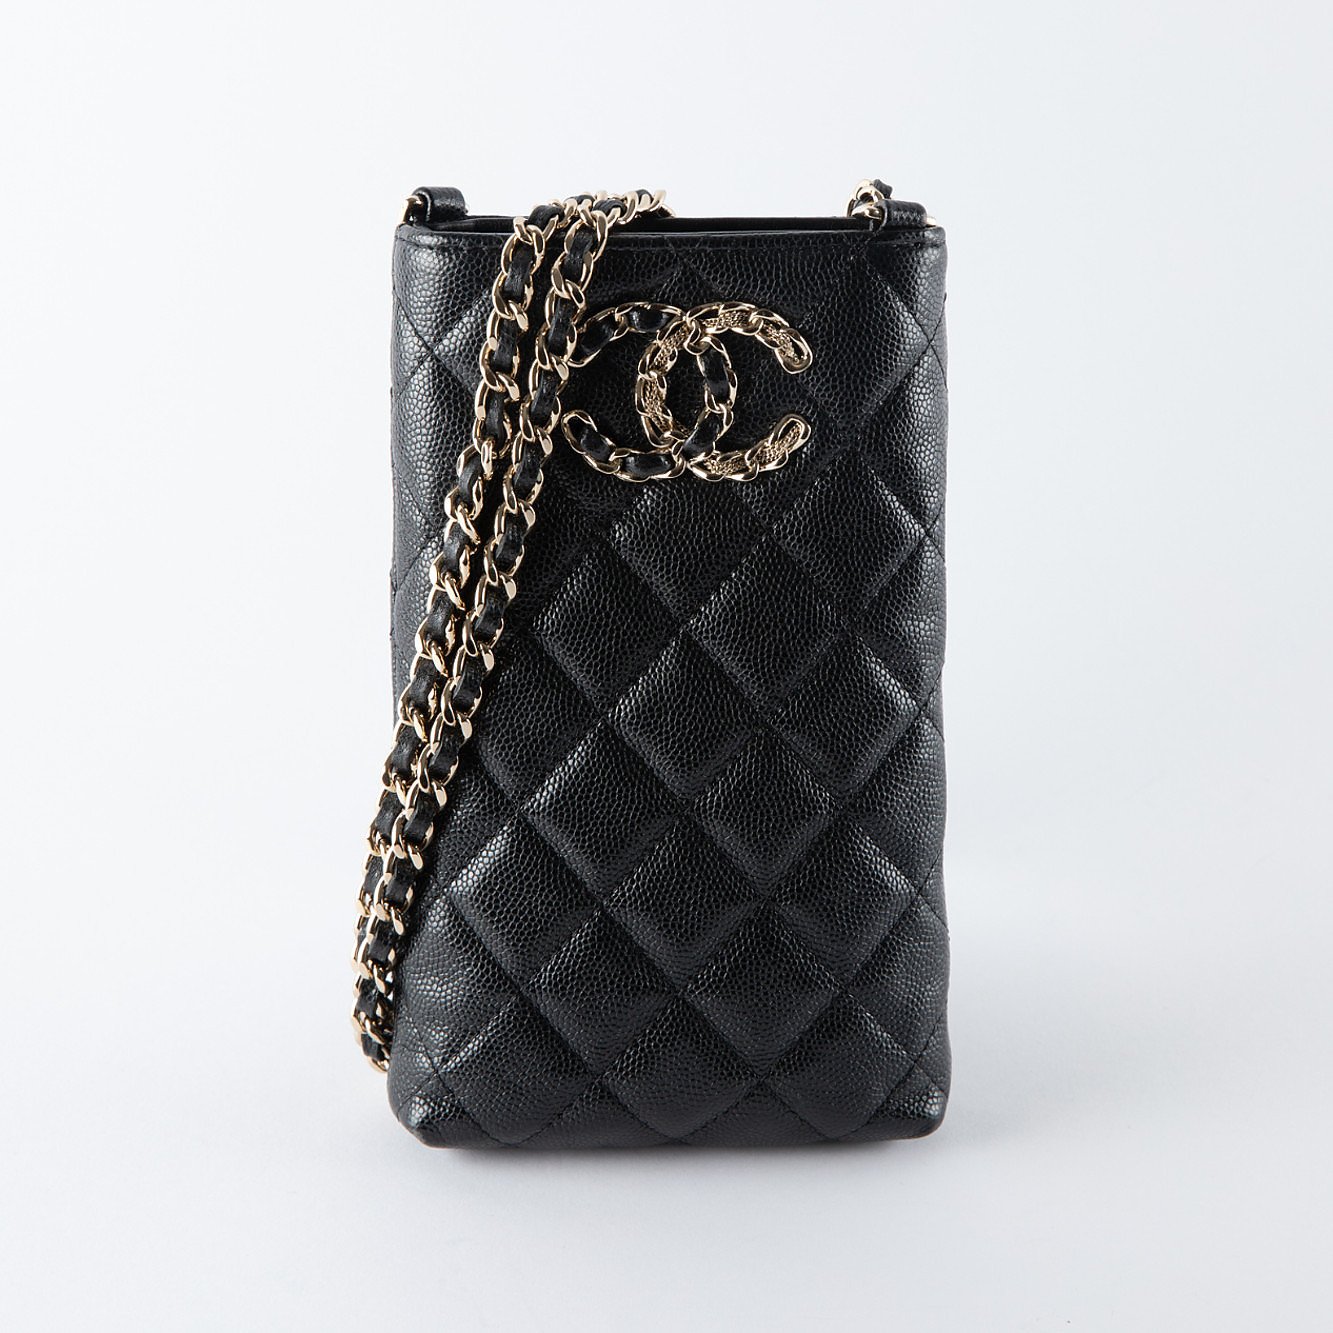 CHANEL Chanel 19 Caviar Phone Pouch